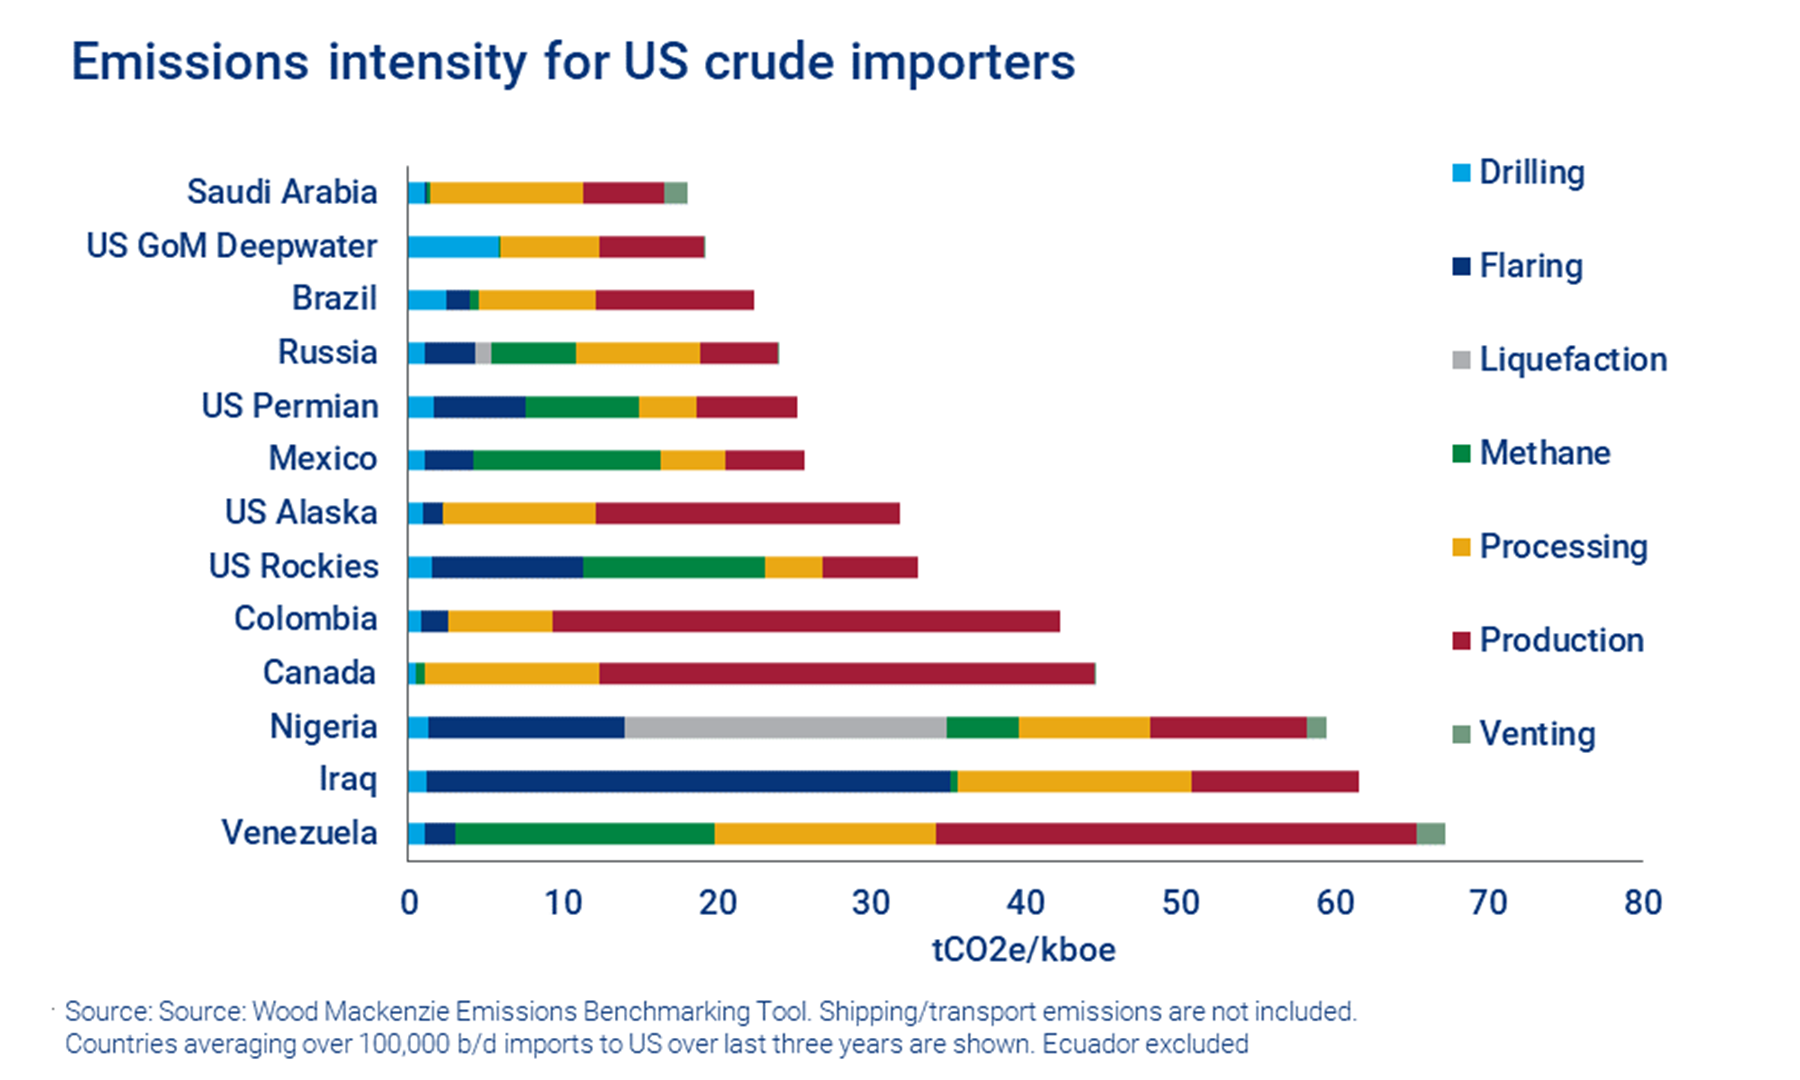 Chart: Emissions intensity for US crude importers. US Gulf of Mexico deepwater emissions are less intensive than all but one importer. 